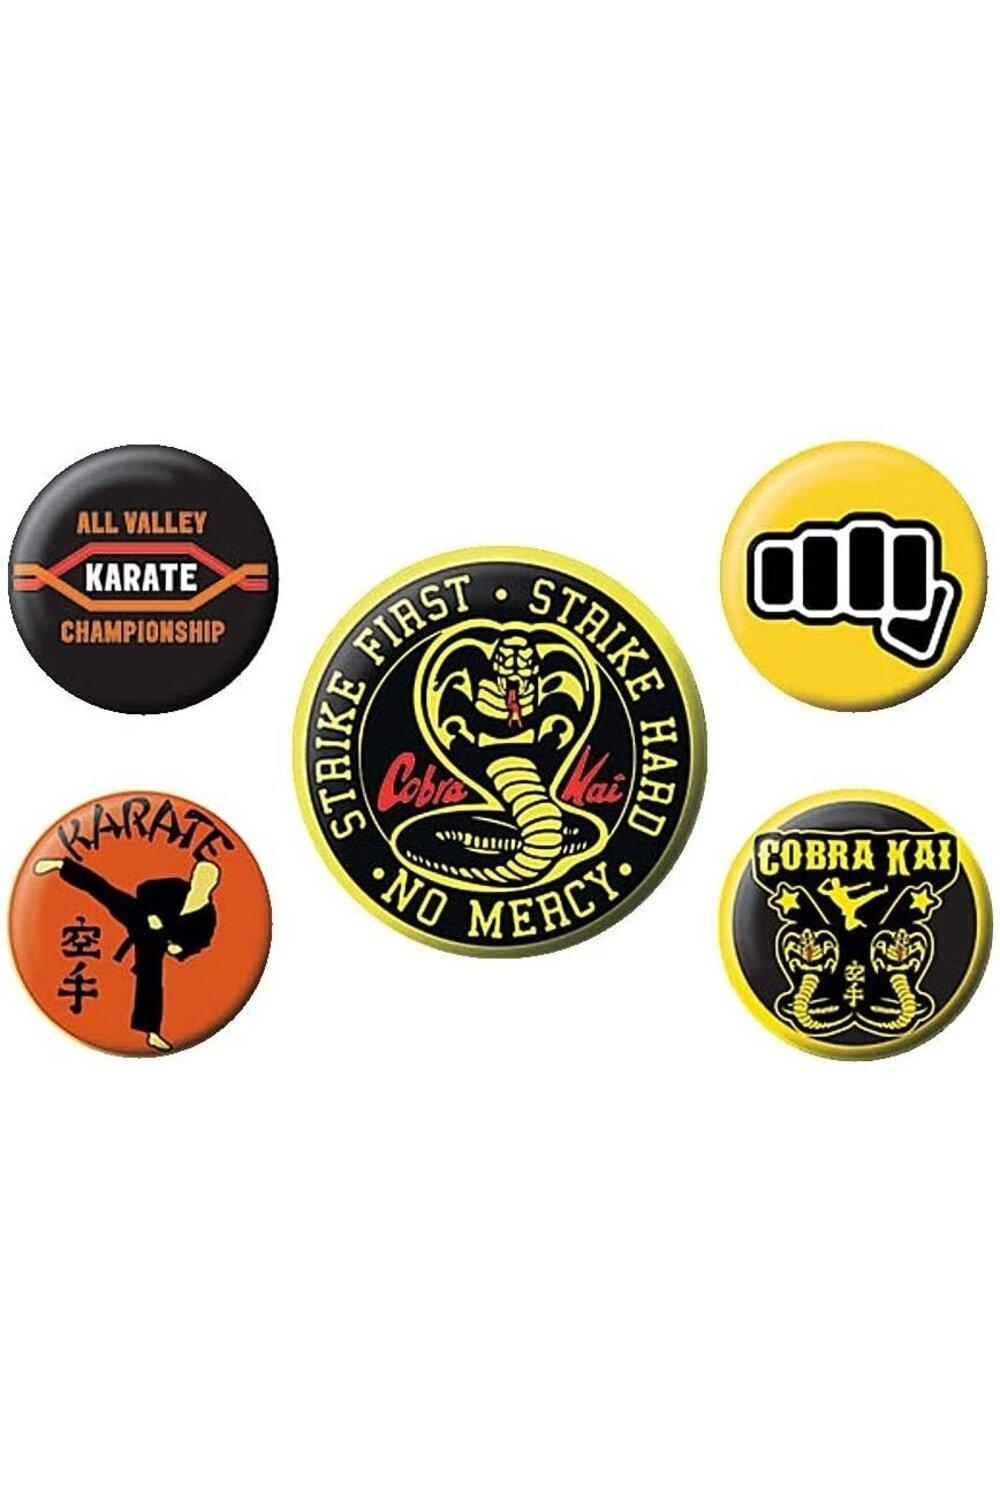 No Mercy Badge Set (Pack of 5)